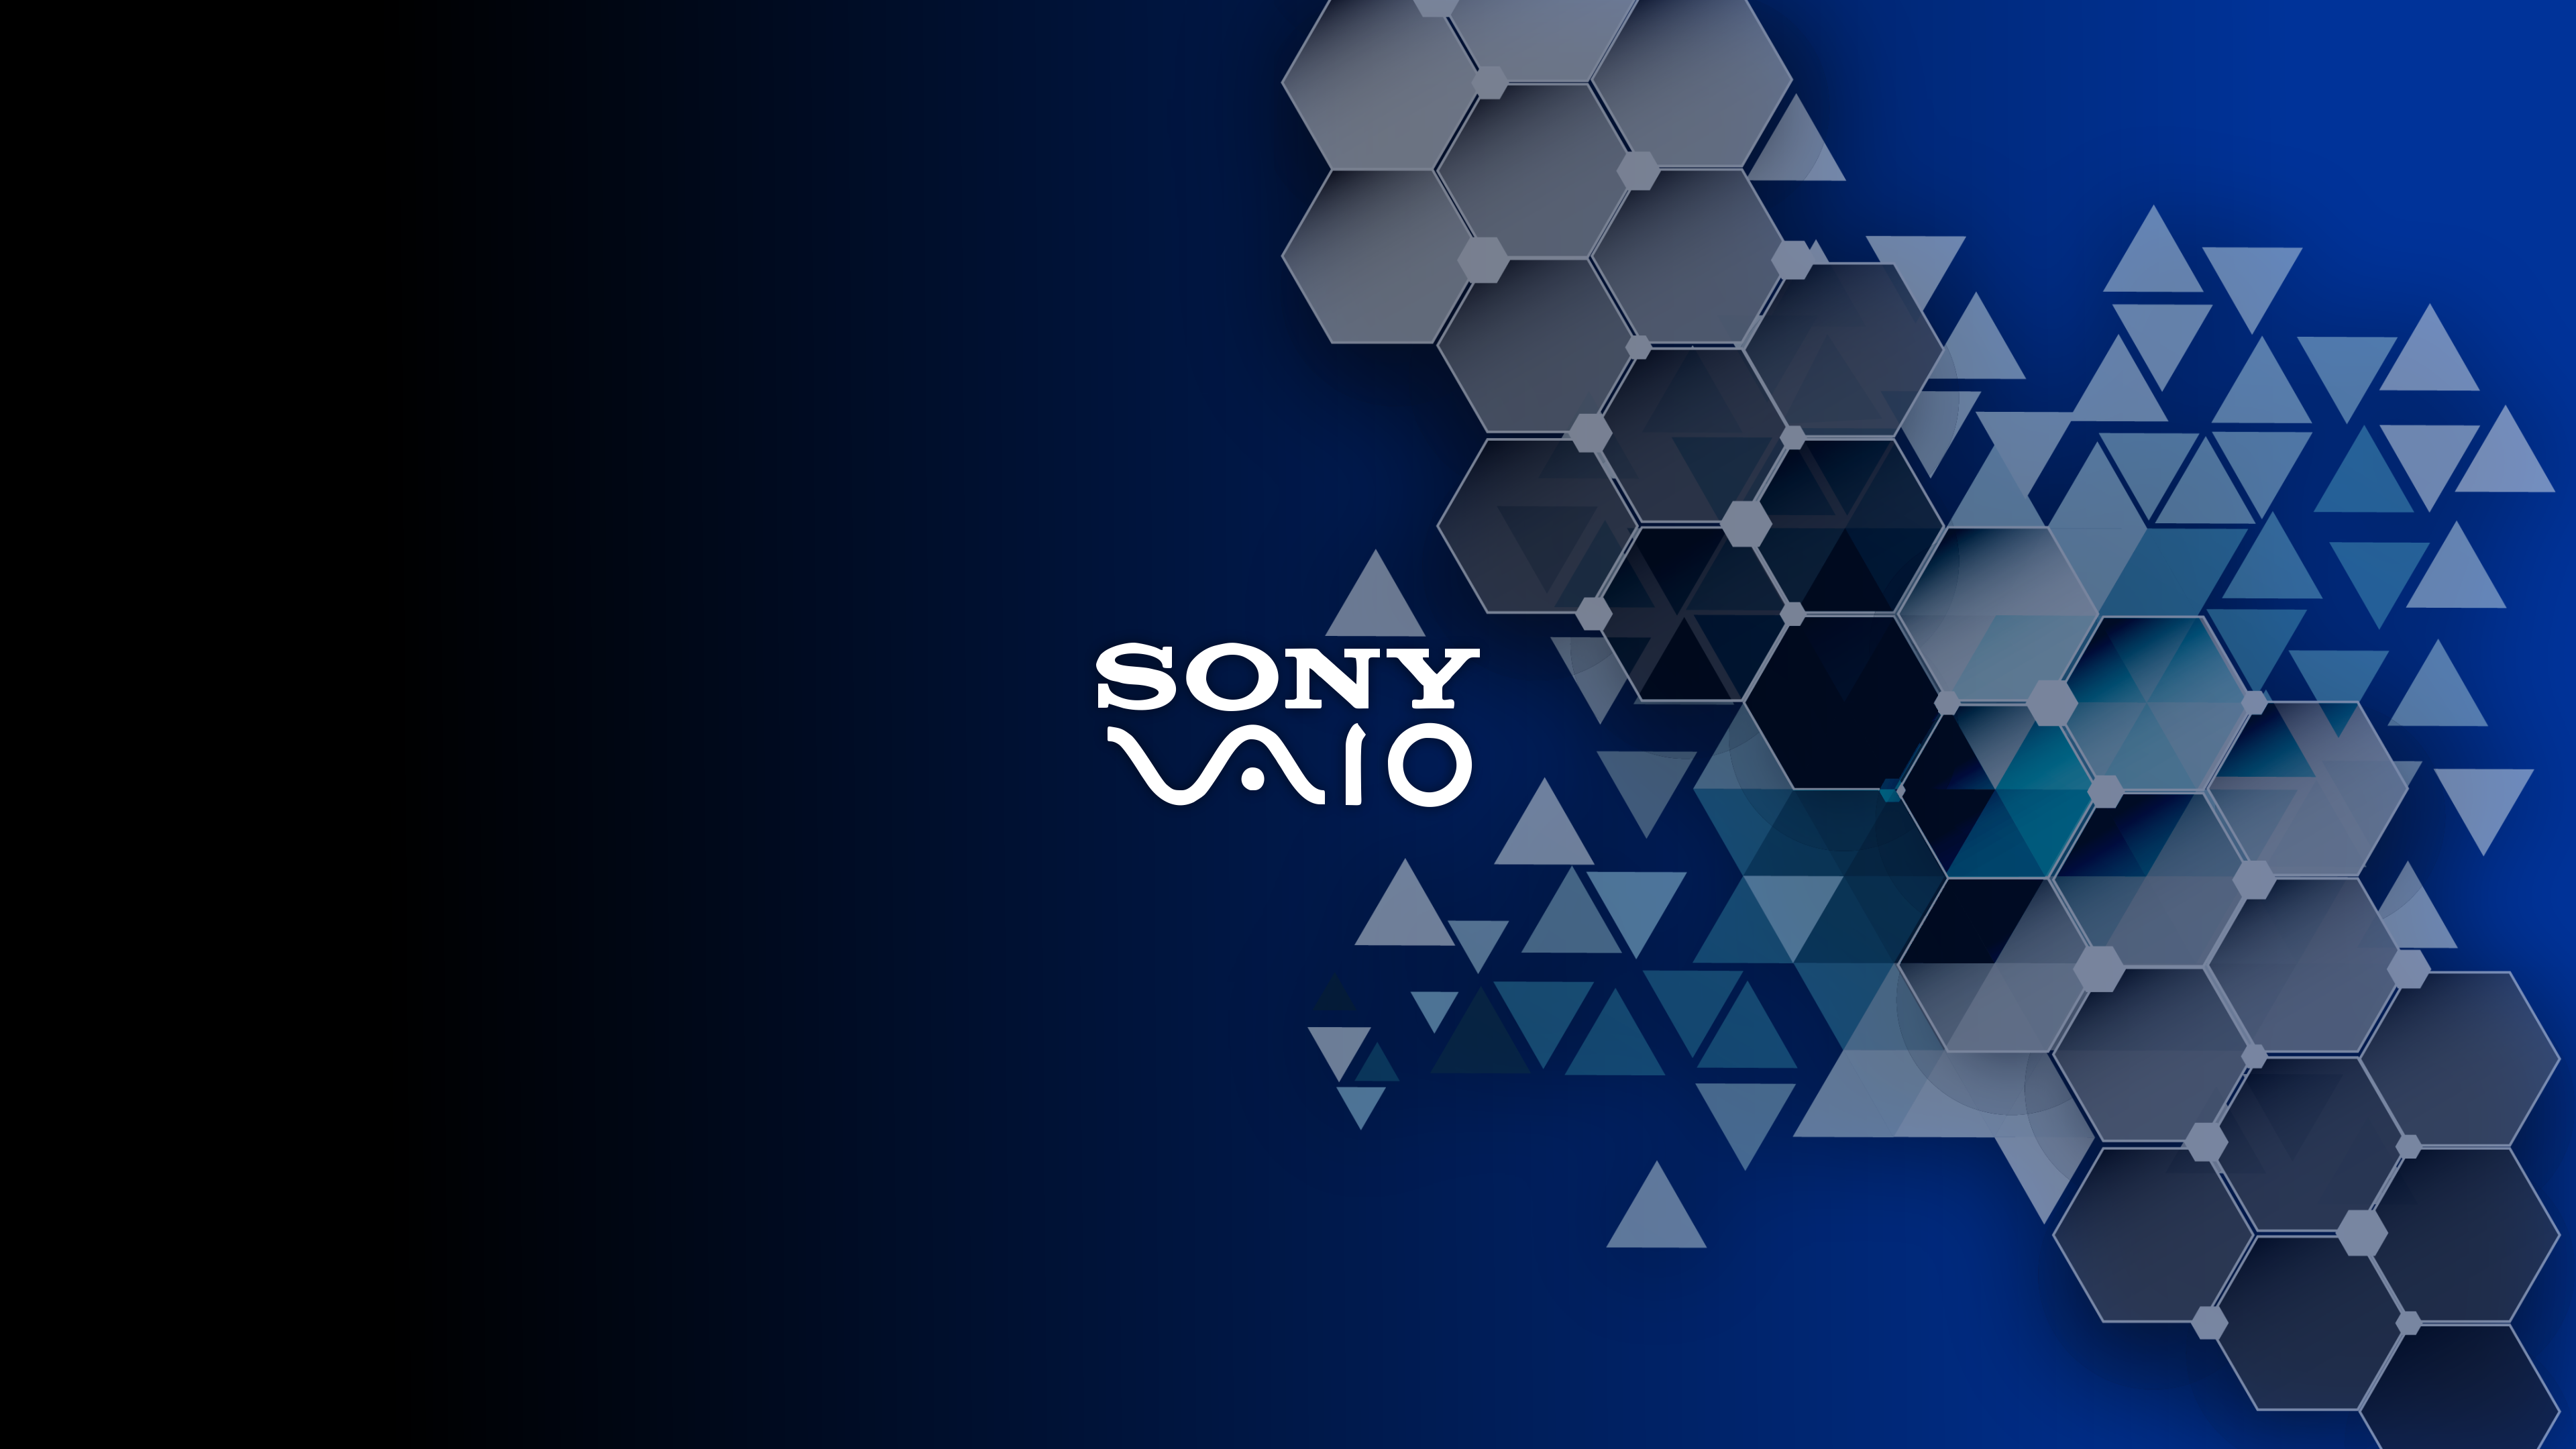 Sony 4K wallpapers for your desktop or mobile screen free and easy to  download